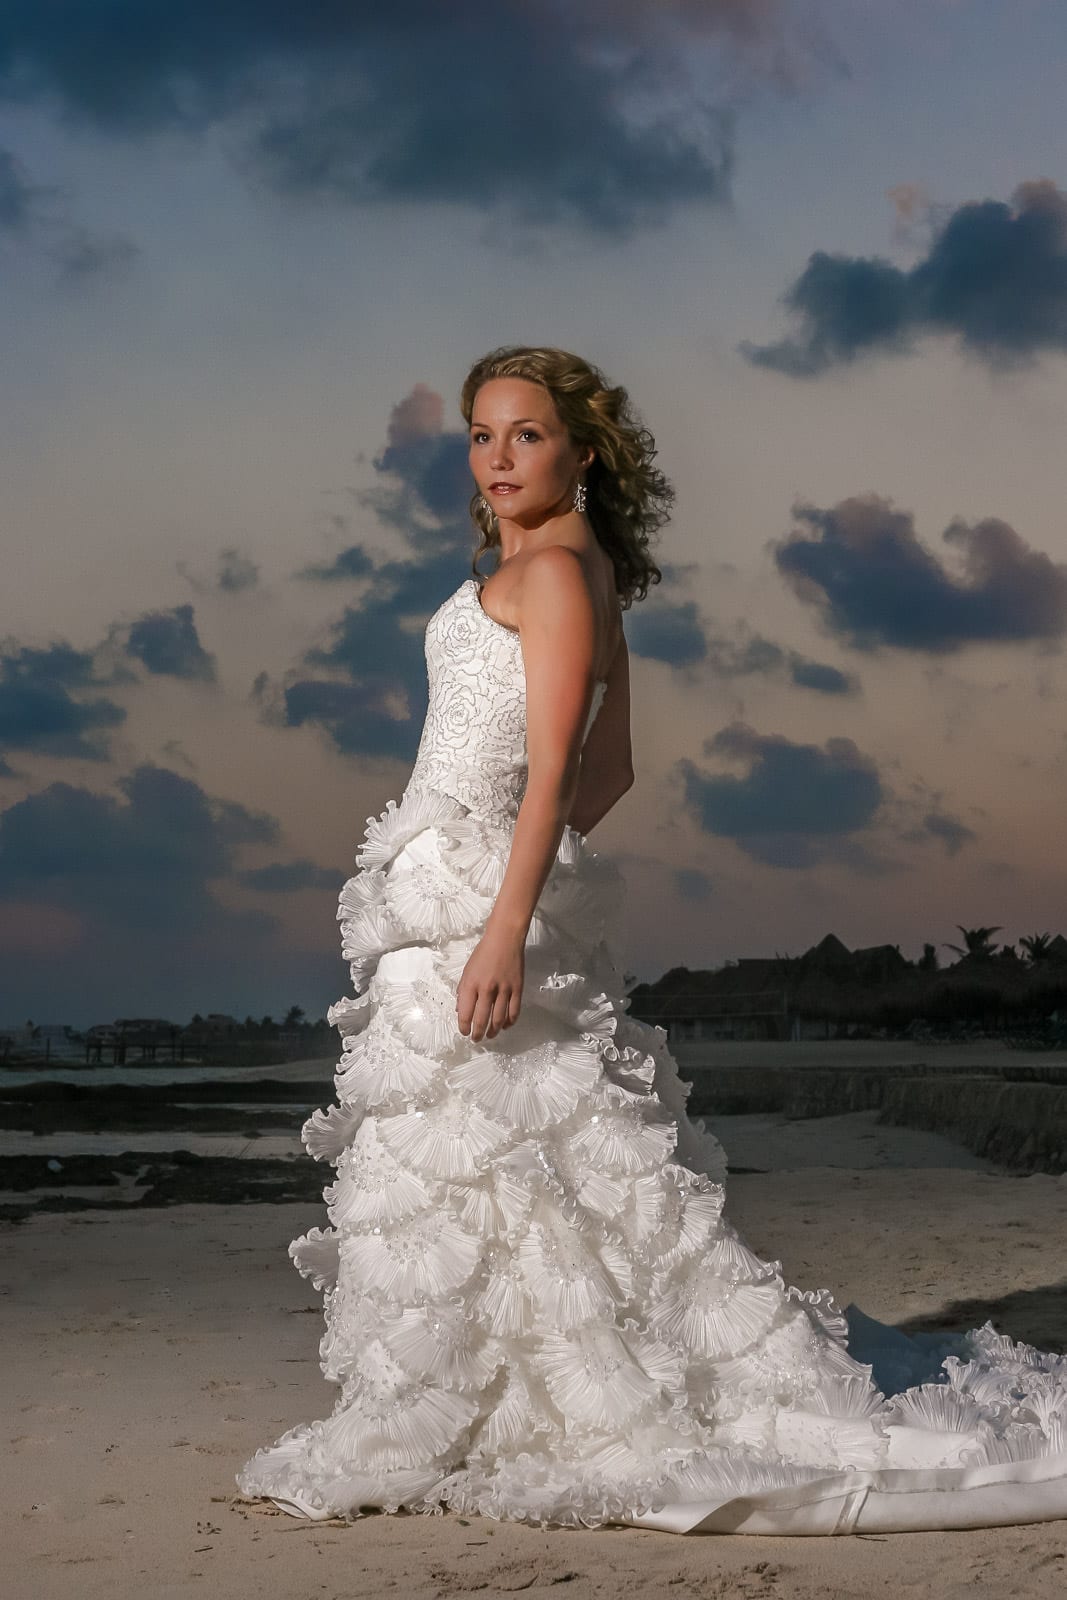 Couture Bridal Fashion Photography - Website Design & Branding for Wedding Industry - Palm Island Creative